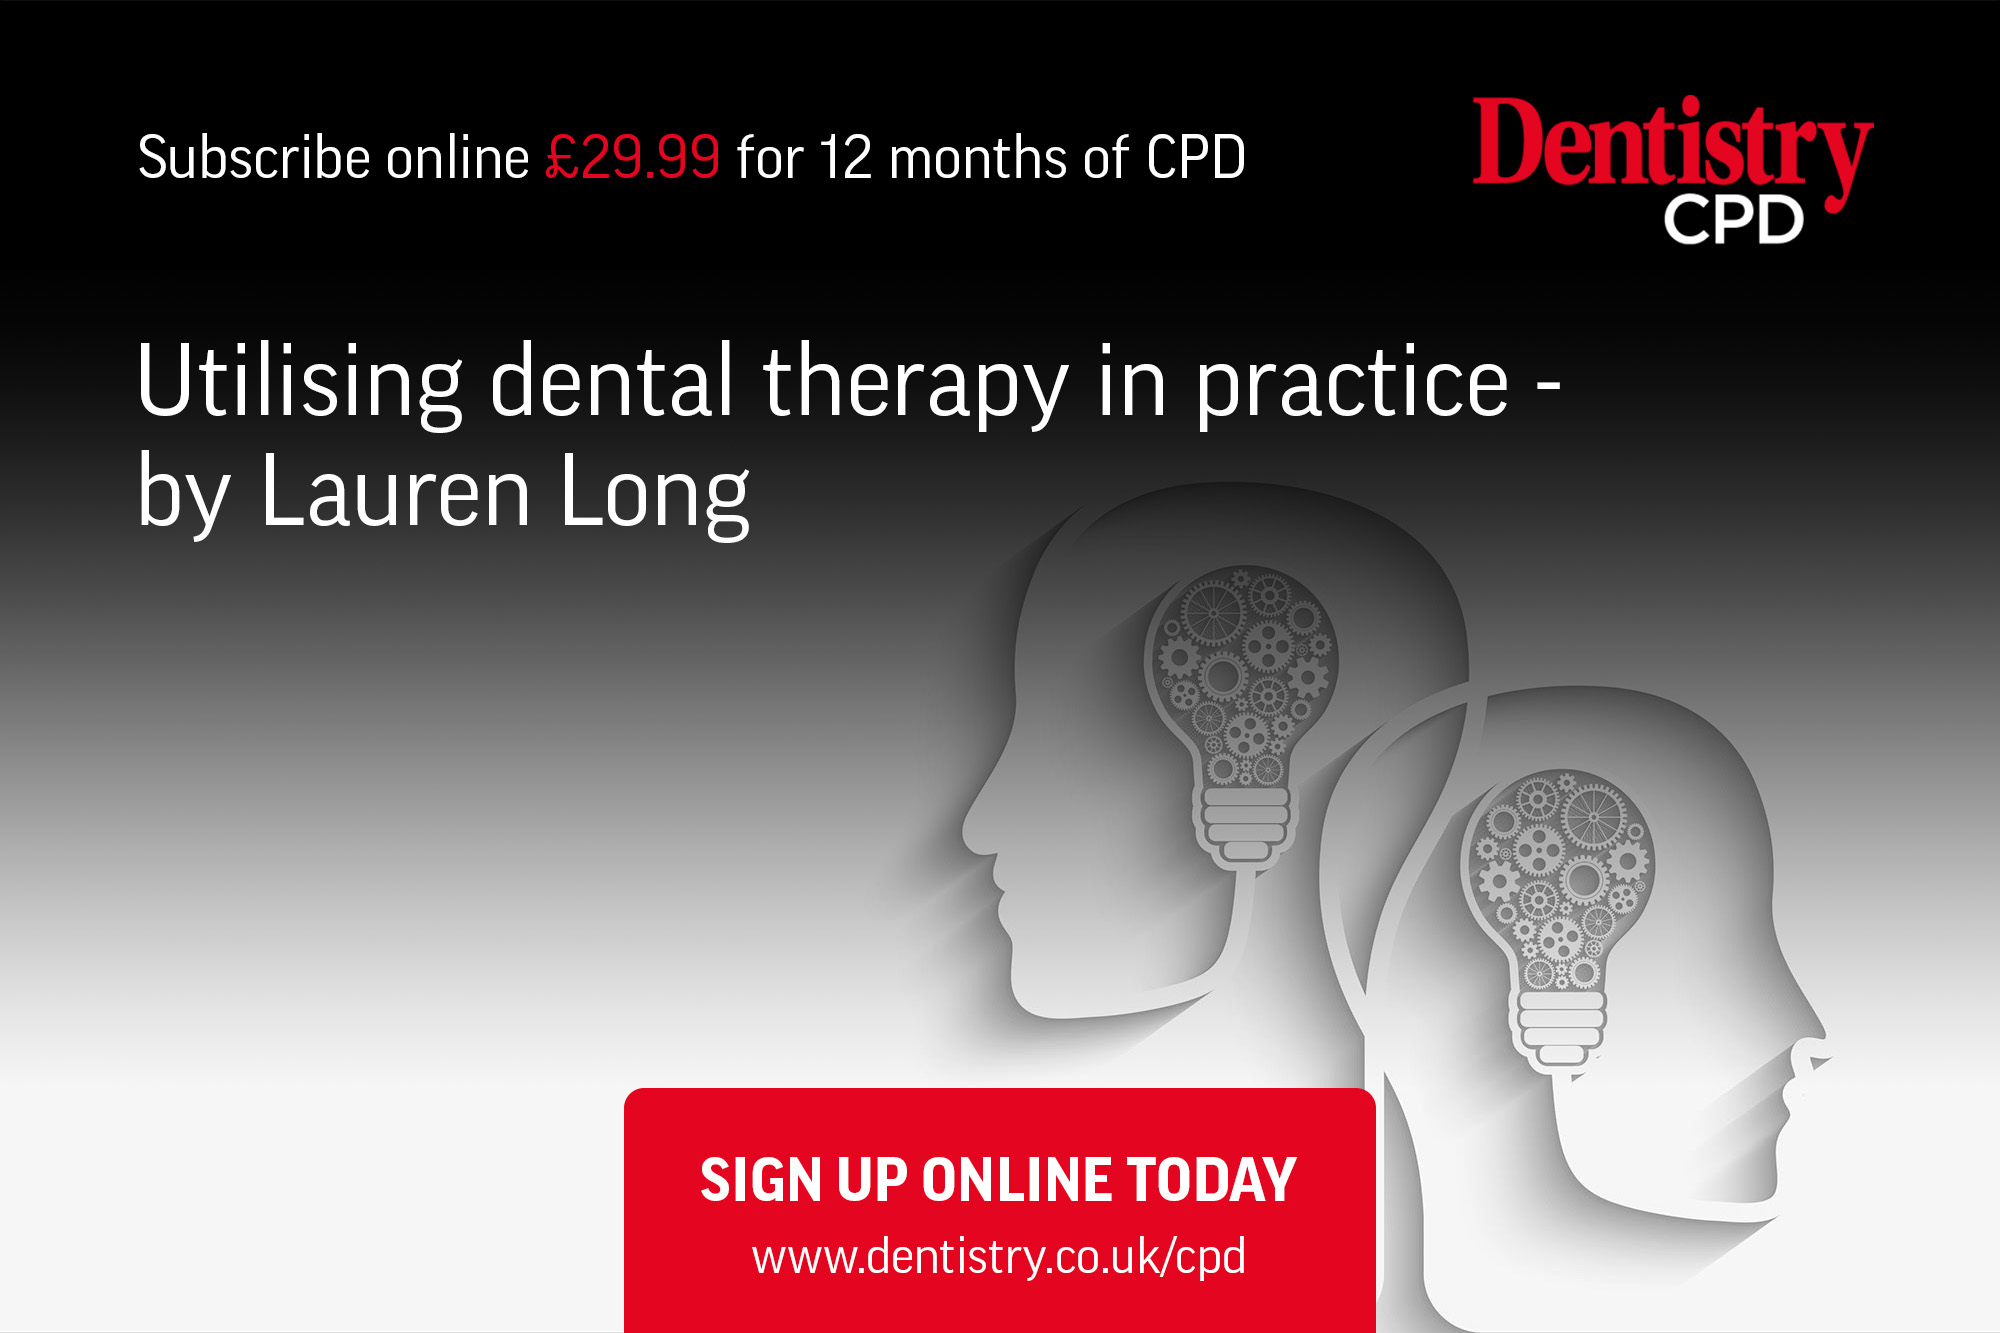 Lauren Long delves into dental therapy and explains how to unleash the hidden potential in practice.